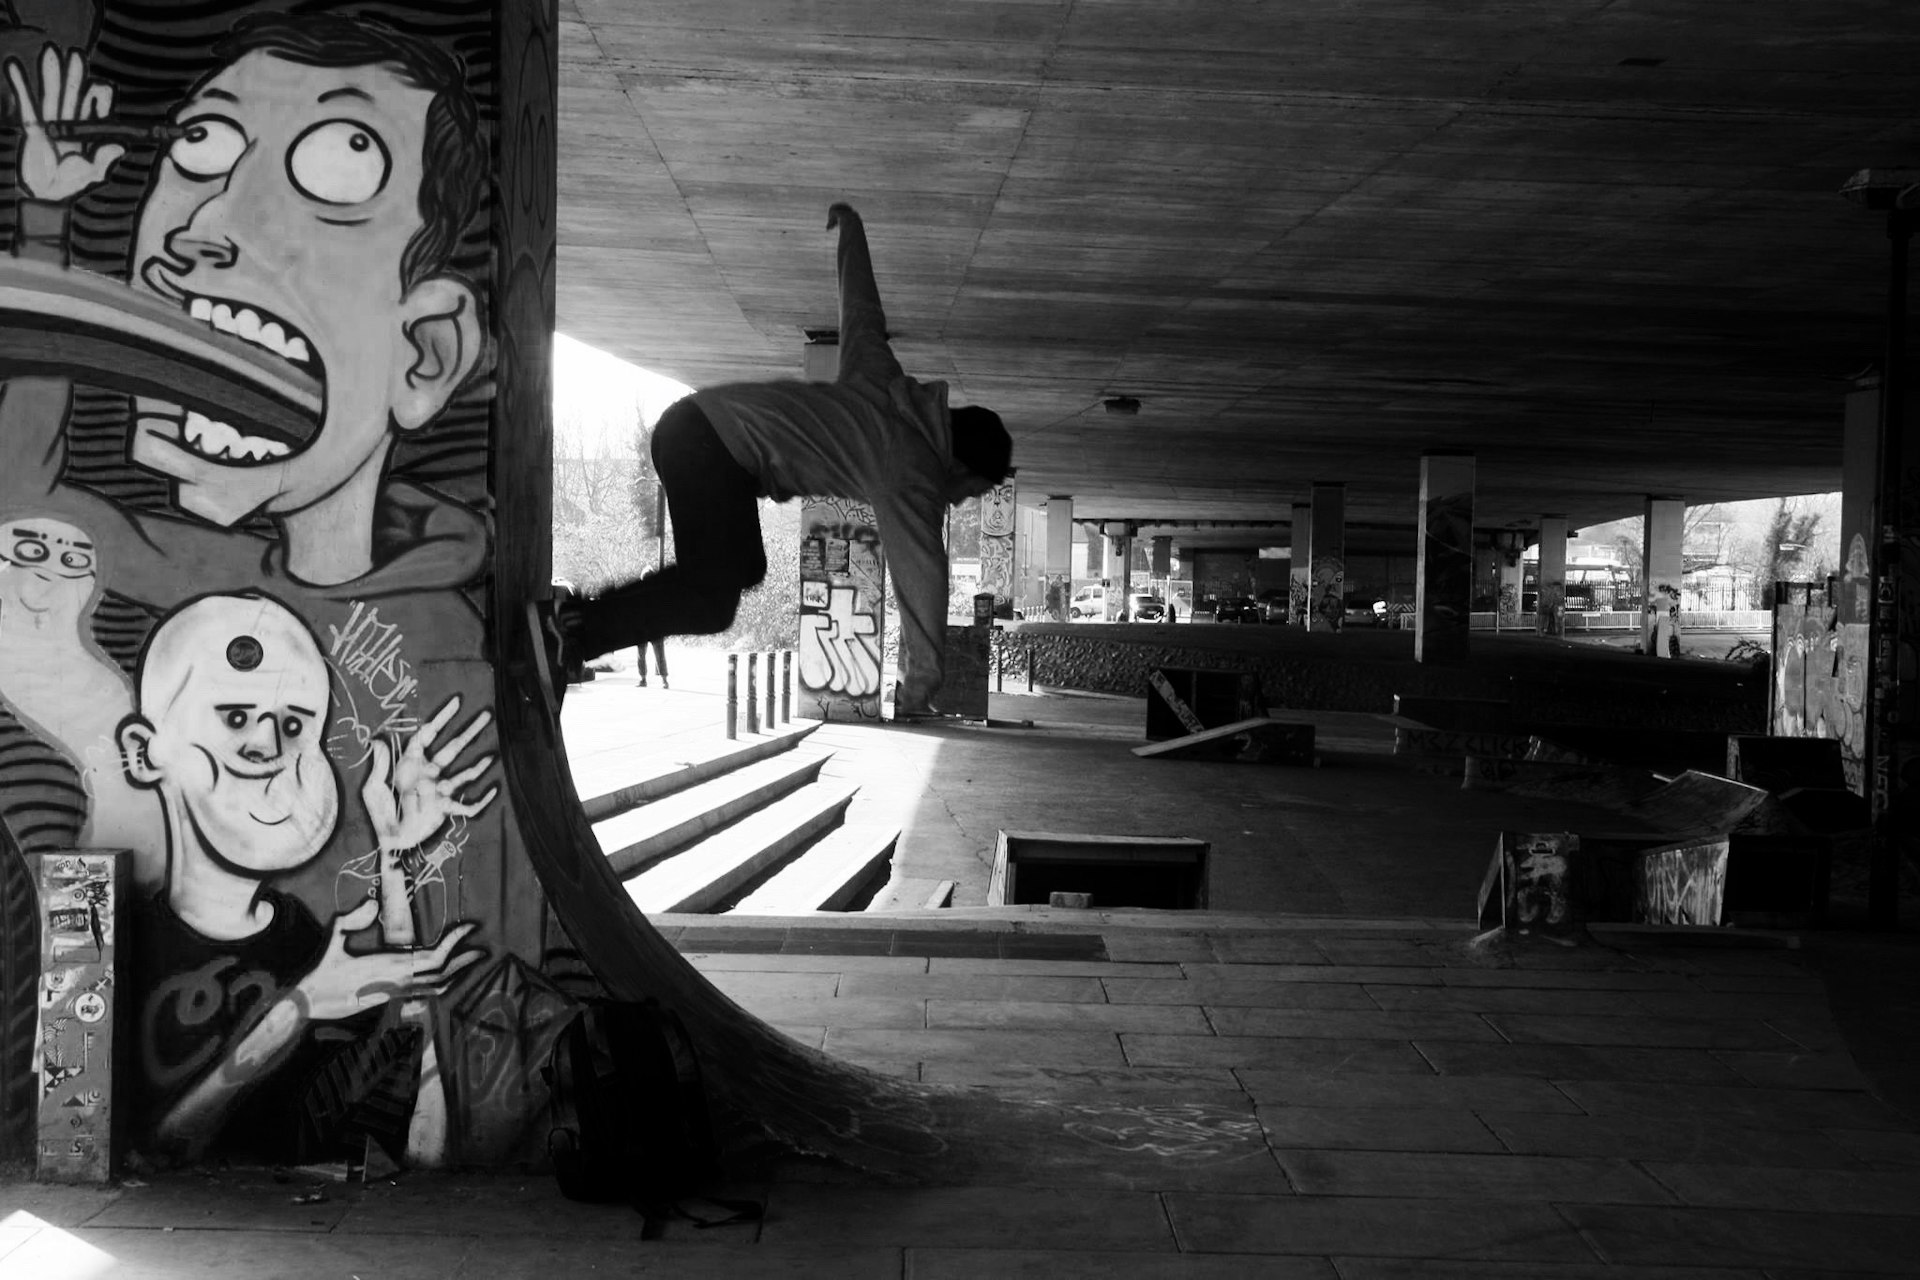 How skaters are reclaiming the world’s forgotten spaces